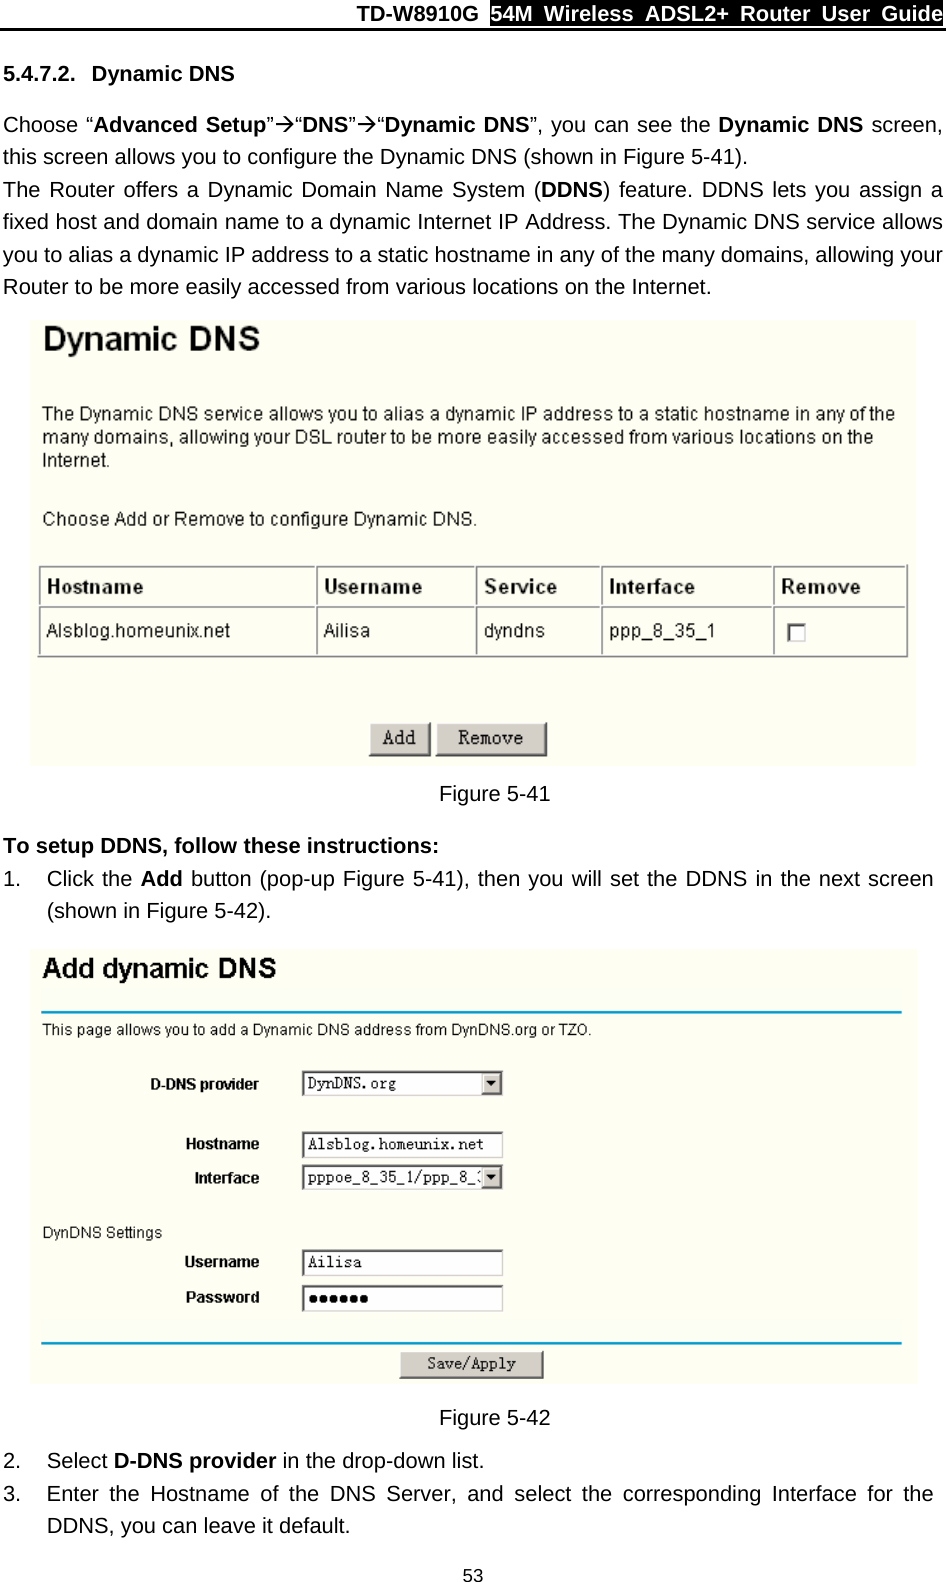 TD-W8910G  54M Wireless ADSL2+ Router User Guide  535.4.7.2. Dynamic DNS Choose “Advanced Setup”Æ“DNS”Æ“Dynamic DNS”, you can see the Dynamic DNS screen, this screen allows you to configure the Dynamic DNS (shown in Figure 5-41). The Router offers a Dynamic Domain Name System (DDNS) feature. DDNS lets you assign a fixed host and domain name to a dynamic Internet IP Address. The Dynamic DNS service allows you to alias a dynamic IP address to a static hostname in any of the many domains, allowing your Router to be more easily accessed from various locations on the Internet.  Figure 5-41 To setup DDNS, follow these instructions: 1. Click the Add button (pop-up Figure 5-41), then you will set the DDNS in the next screen (shown in Figure 5-42).  Figure 5-42 2. Select D-DNS provider in the drop-down list. 3.  Enter the Hostname of the DNS Server, and select the corresponding Interface for the DDNS, you can leave it default. 